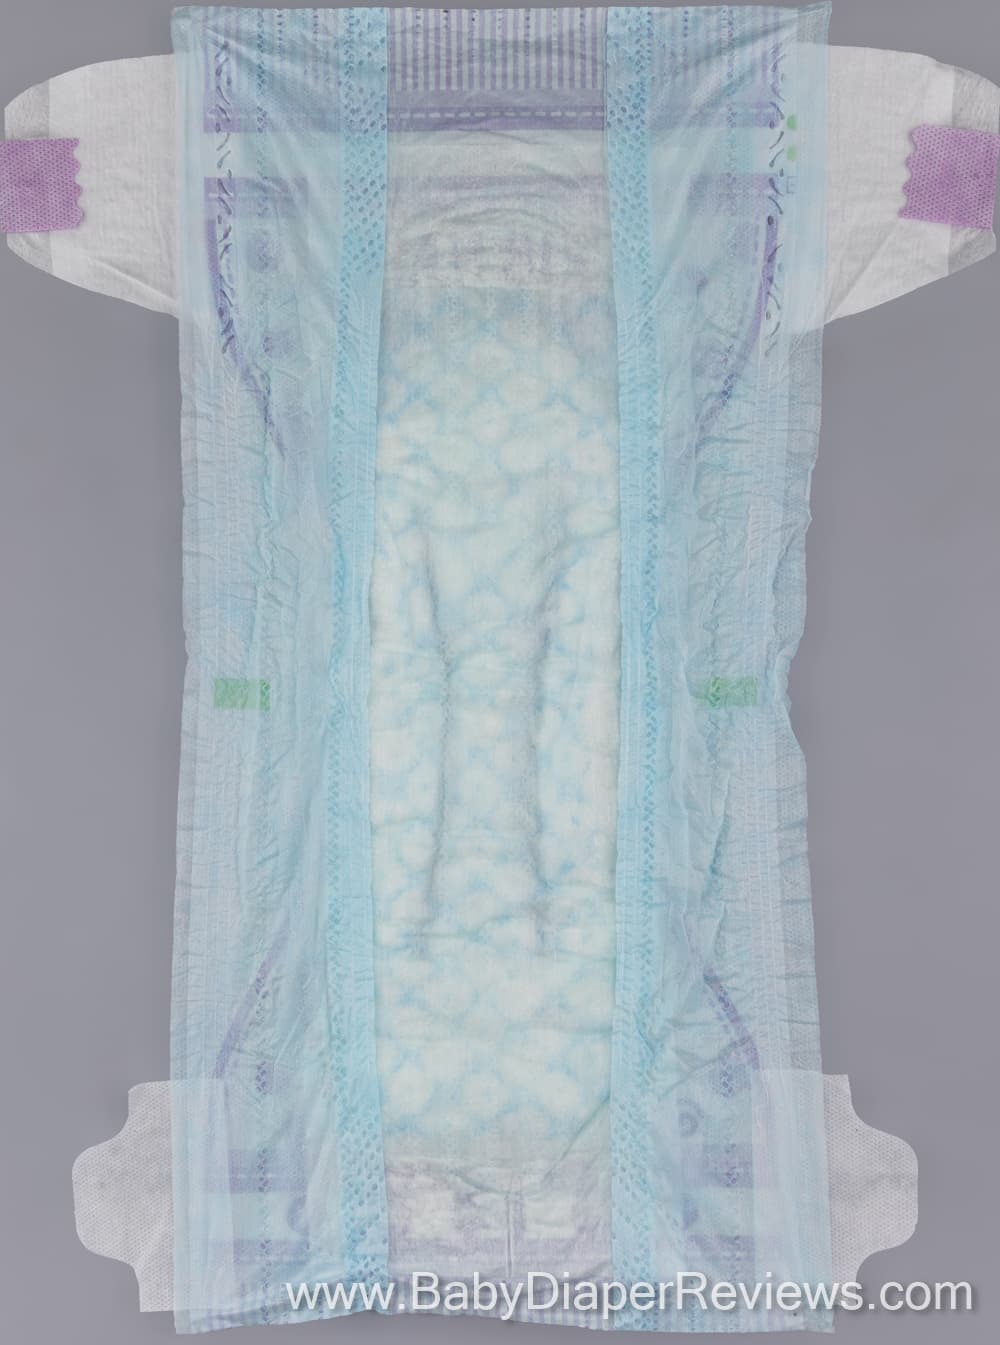 Detailed vide of the inside of the diaper